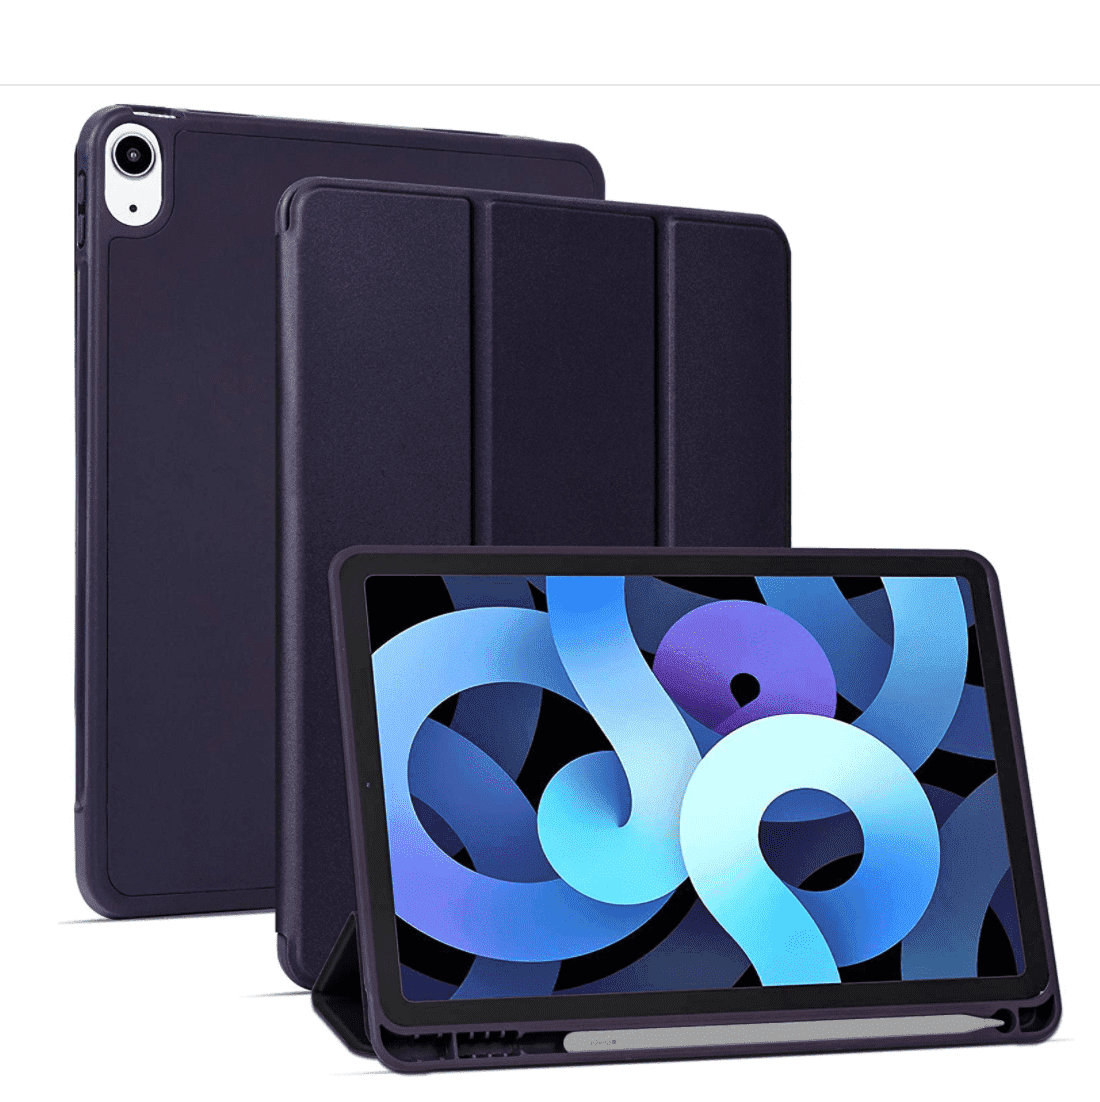 iPad Air 4 Back Cover 10.9 (2021) Protective Cover